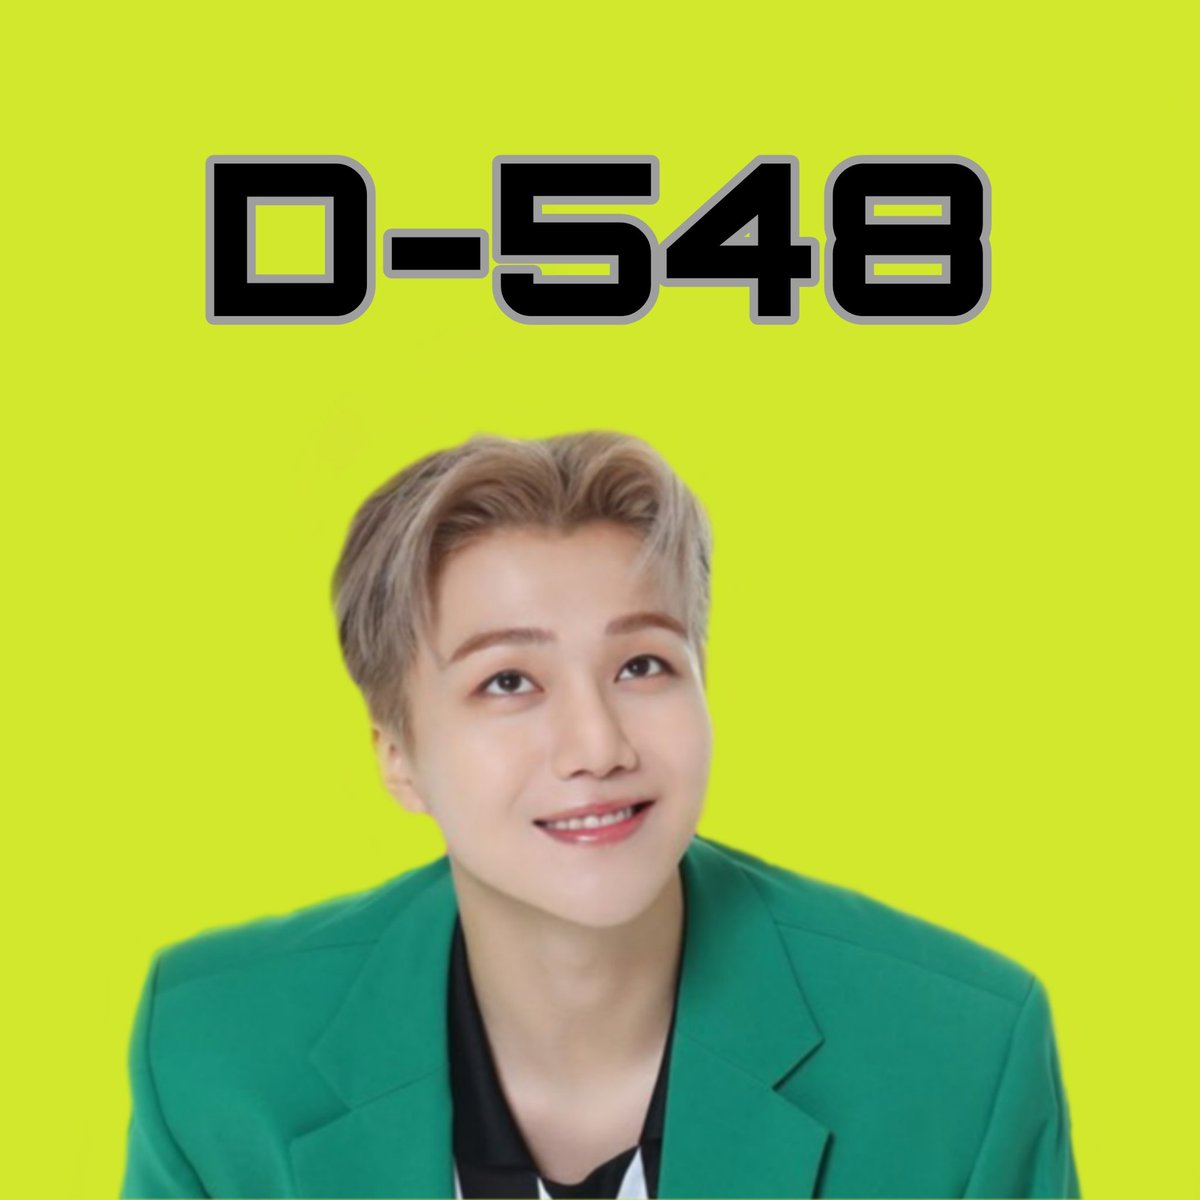 D-548- Jinhoya.. we already saw the last stage that you prepared for us. Universe receive it well and cried a river  this stage will forever be special in our hearts. Thank you and I love you  #Jinho  #Pentagon  #진호  #펜타곤  @CUBE_PTG